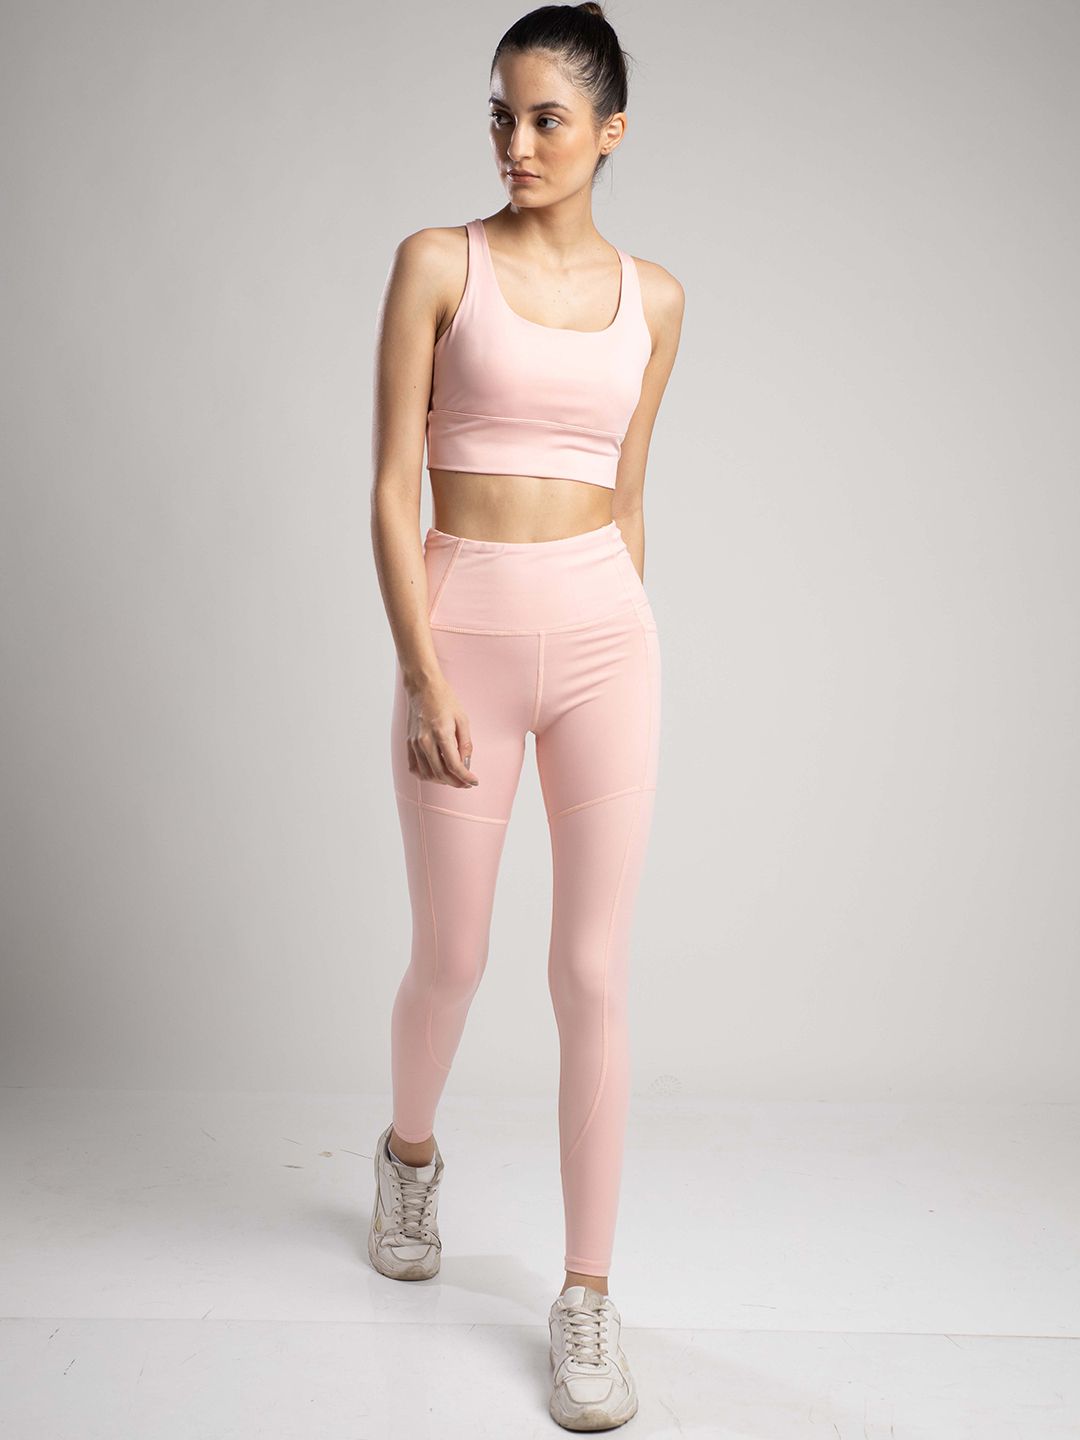 SKNZ Women Pink Solid Top & Tights Set Price in India